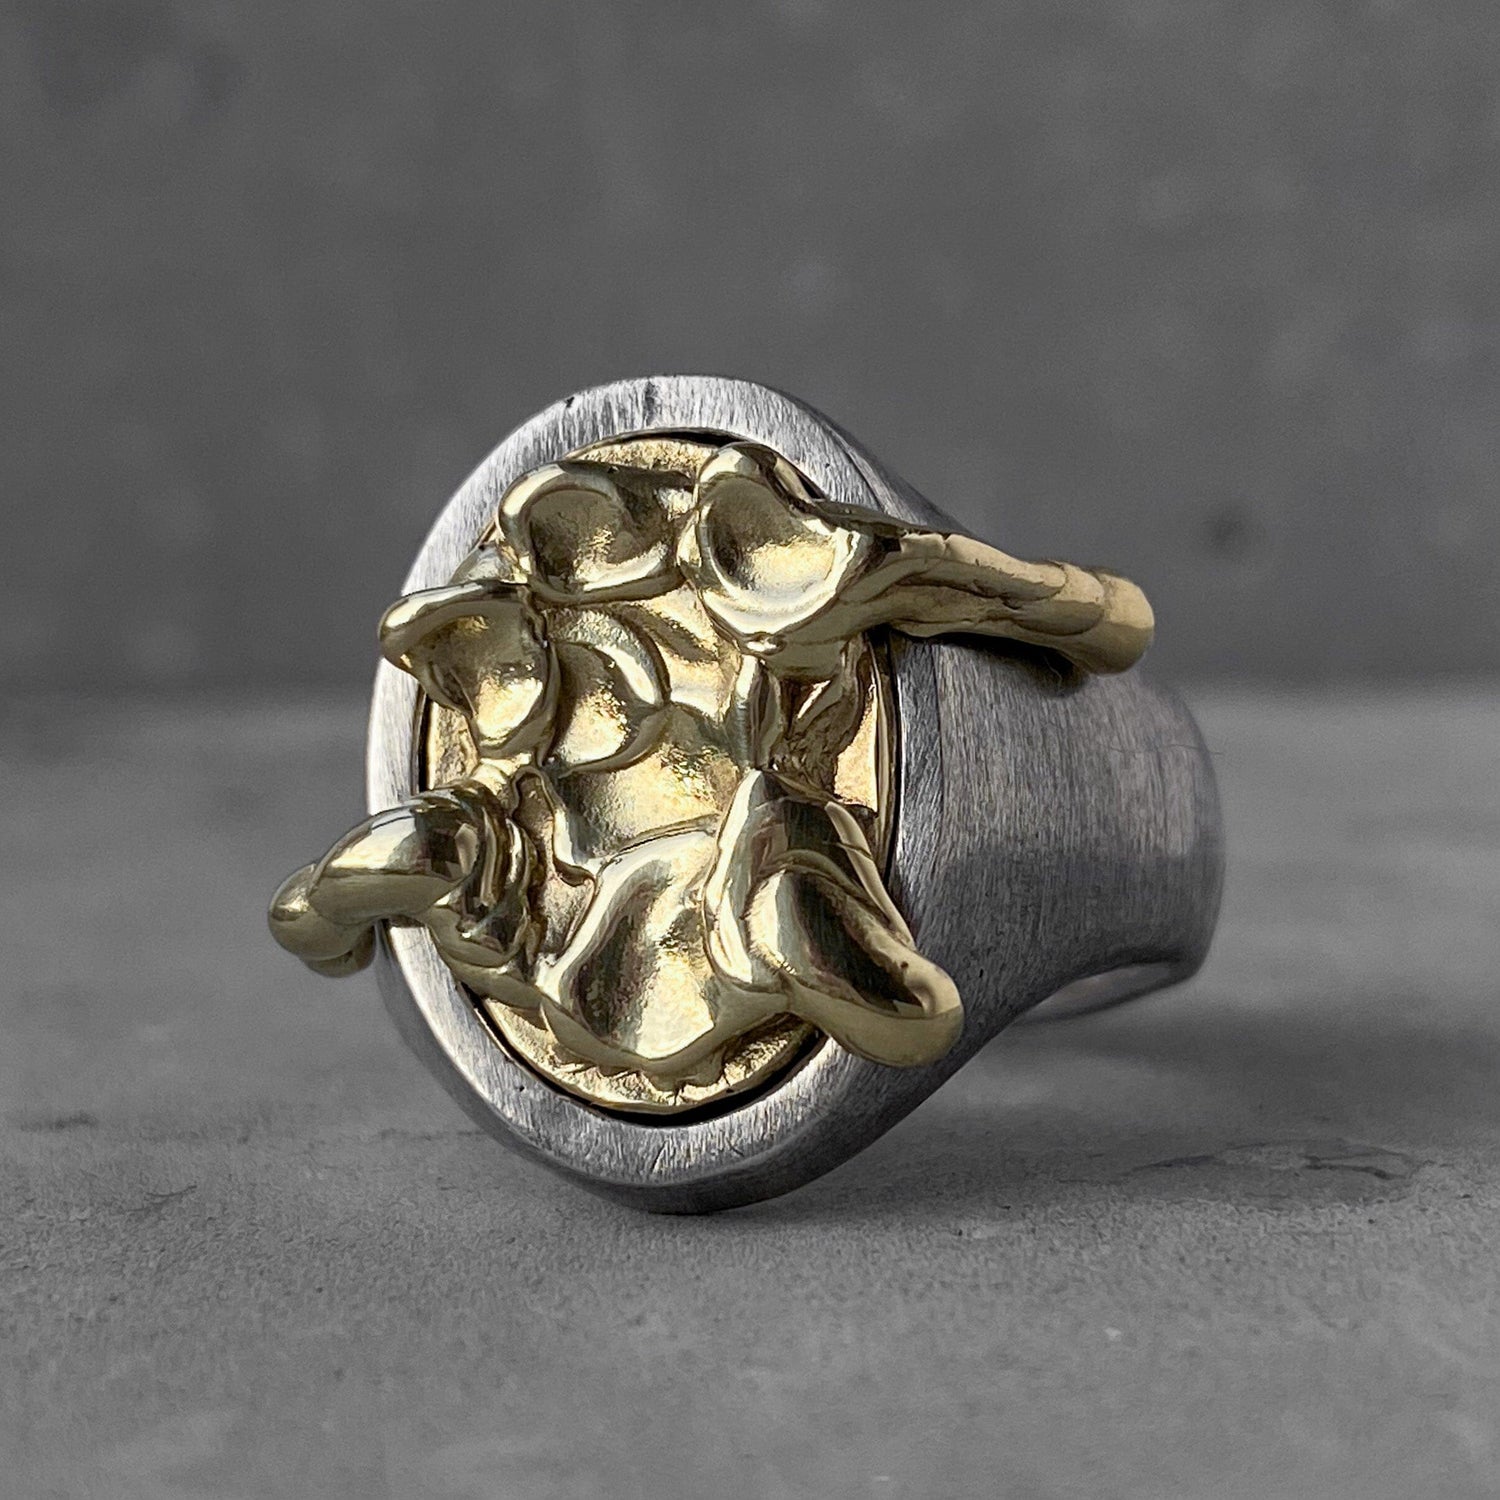 Lava ring-Oval Signet Ring with Matte Texture and Molten Metal Top (Brass/Gold) Unusual rings Project50g 